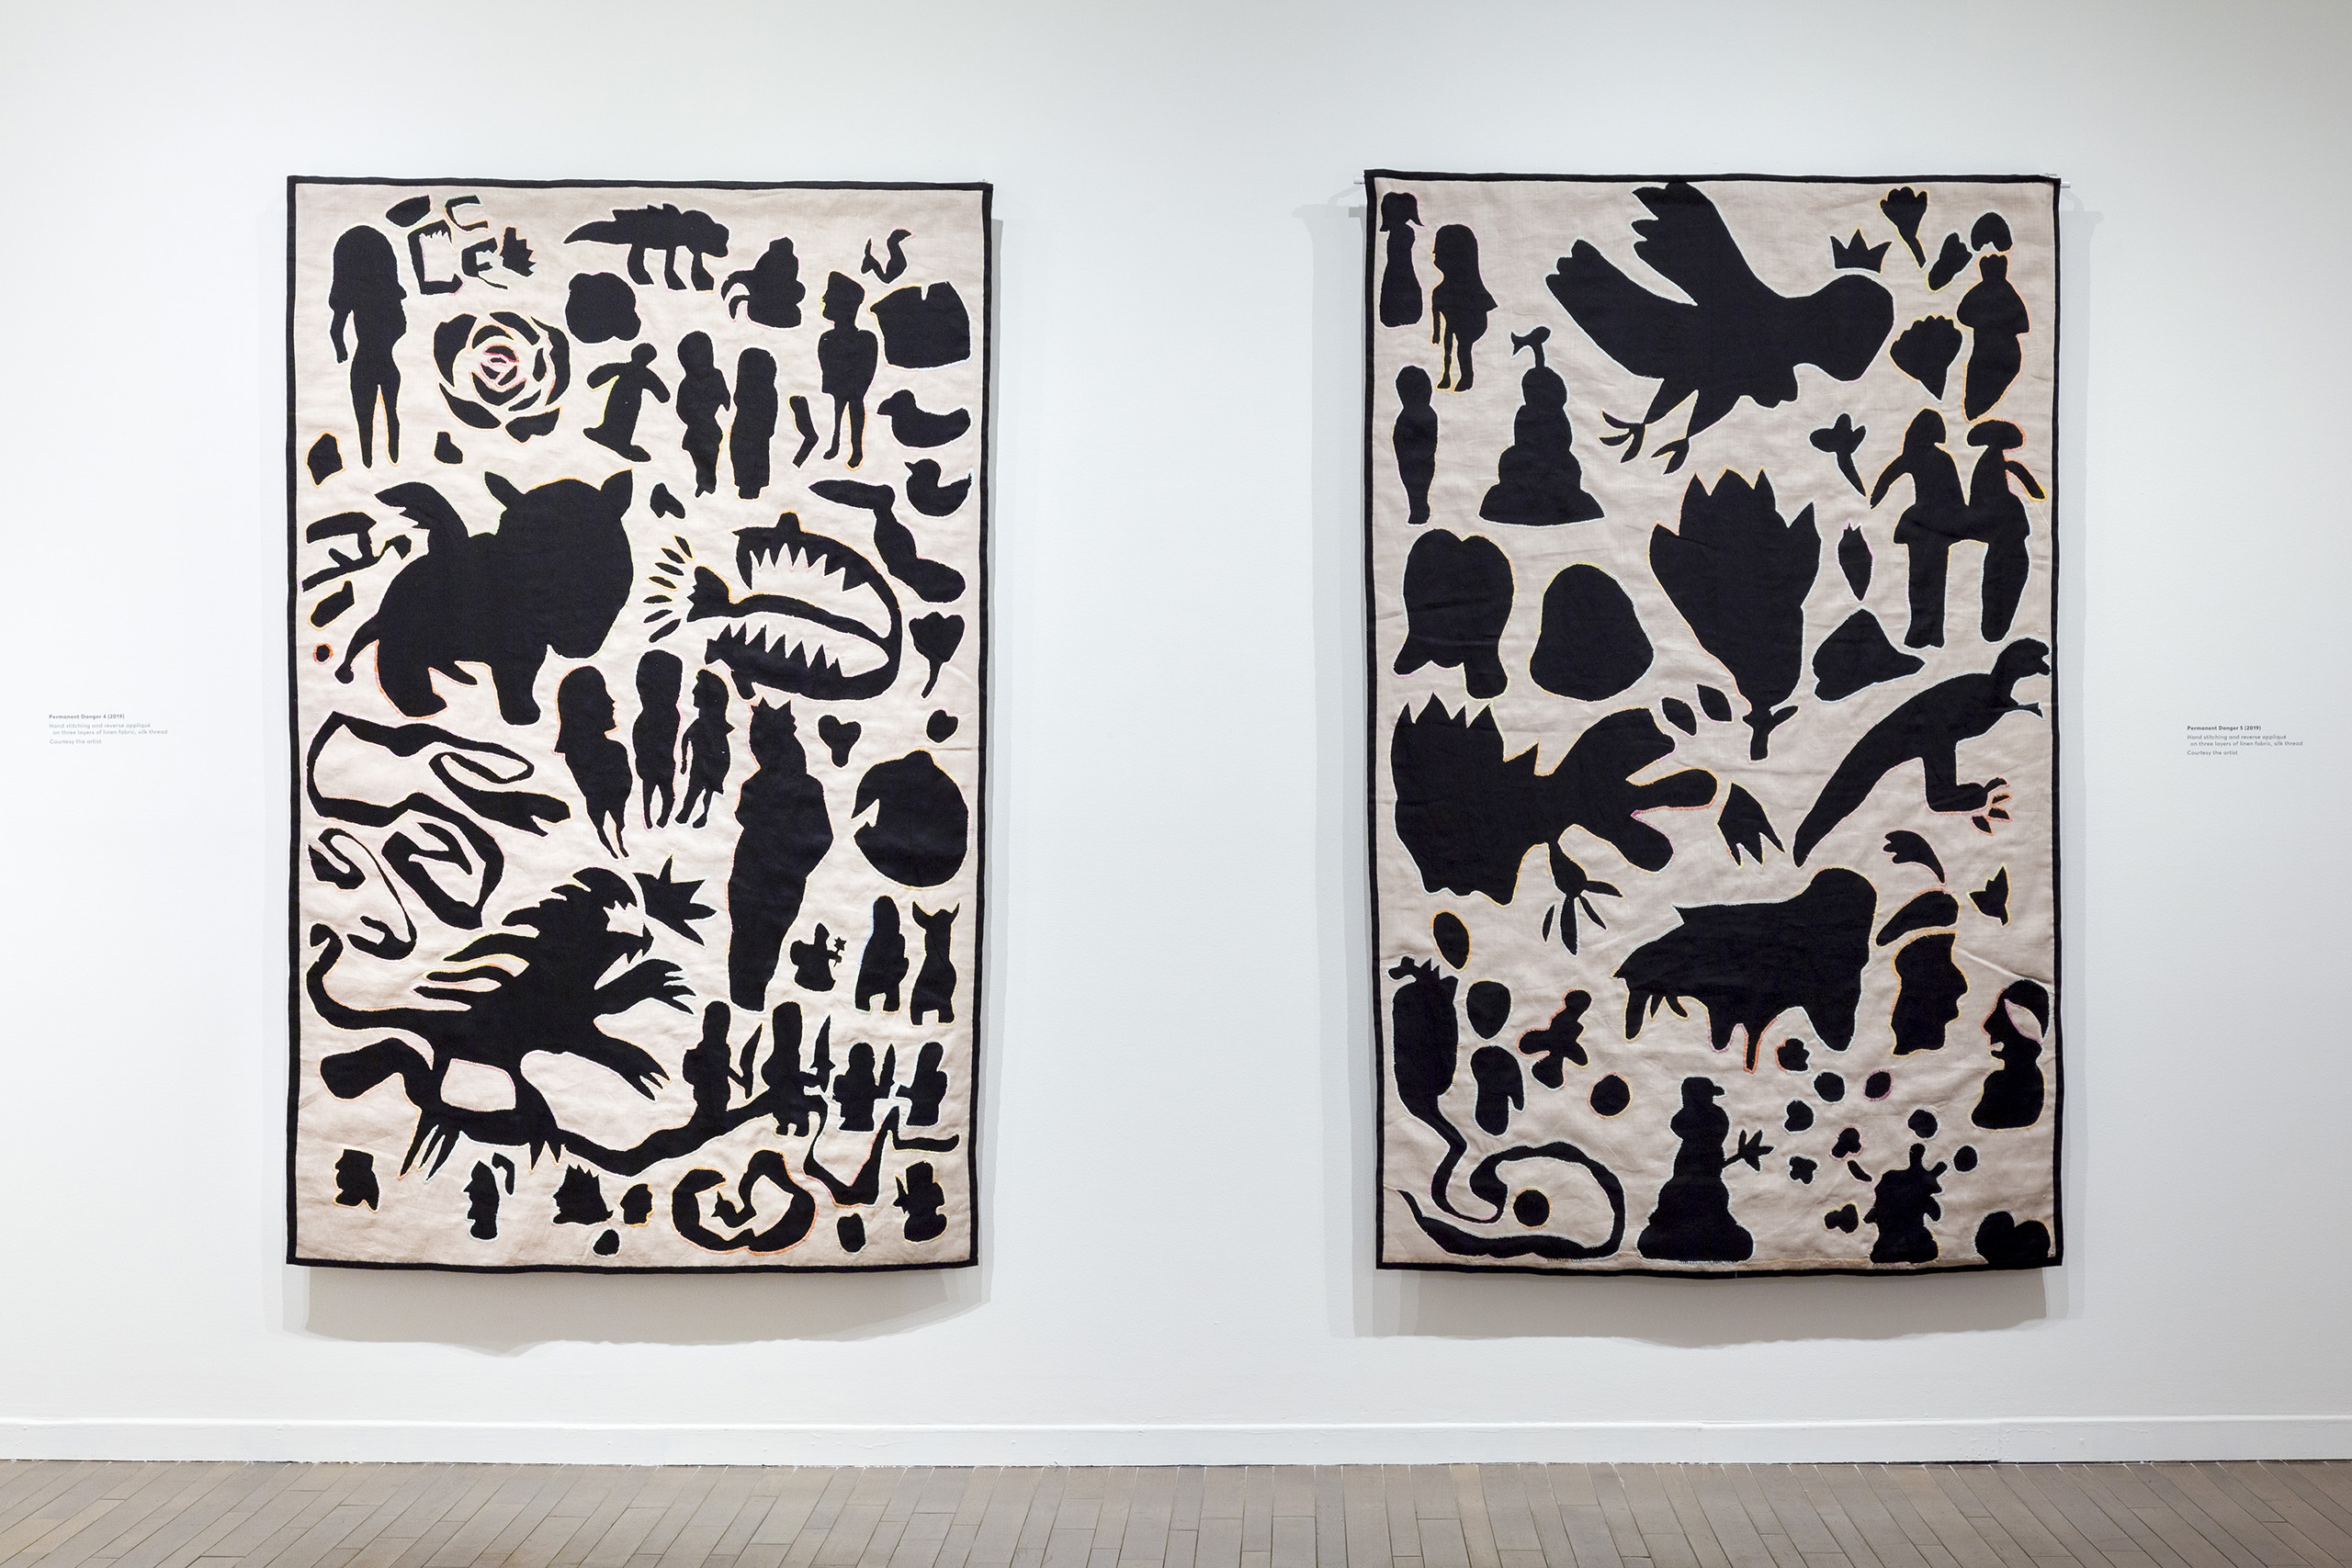 Two large embroidered hangings with black shapes and silhouettes of fantasy creatures on a tan ground colour.